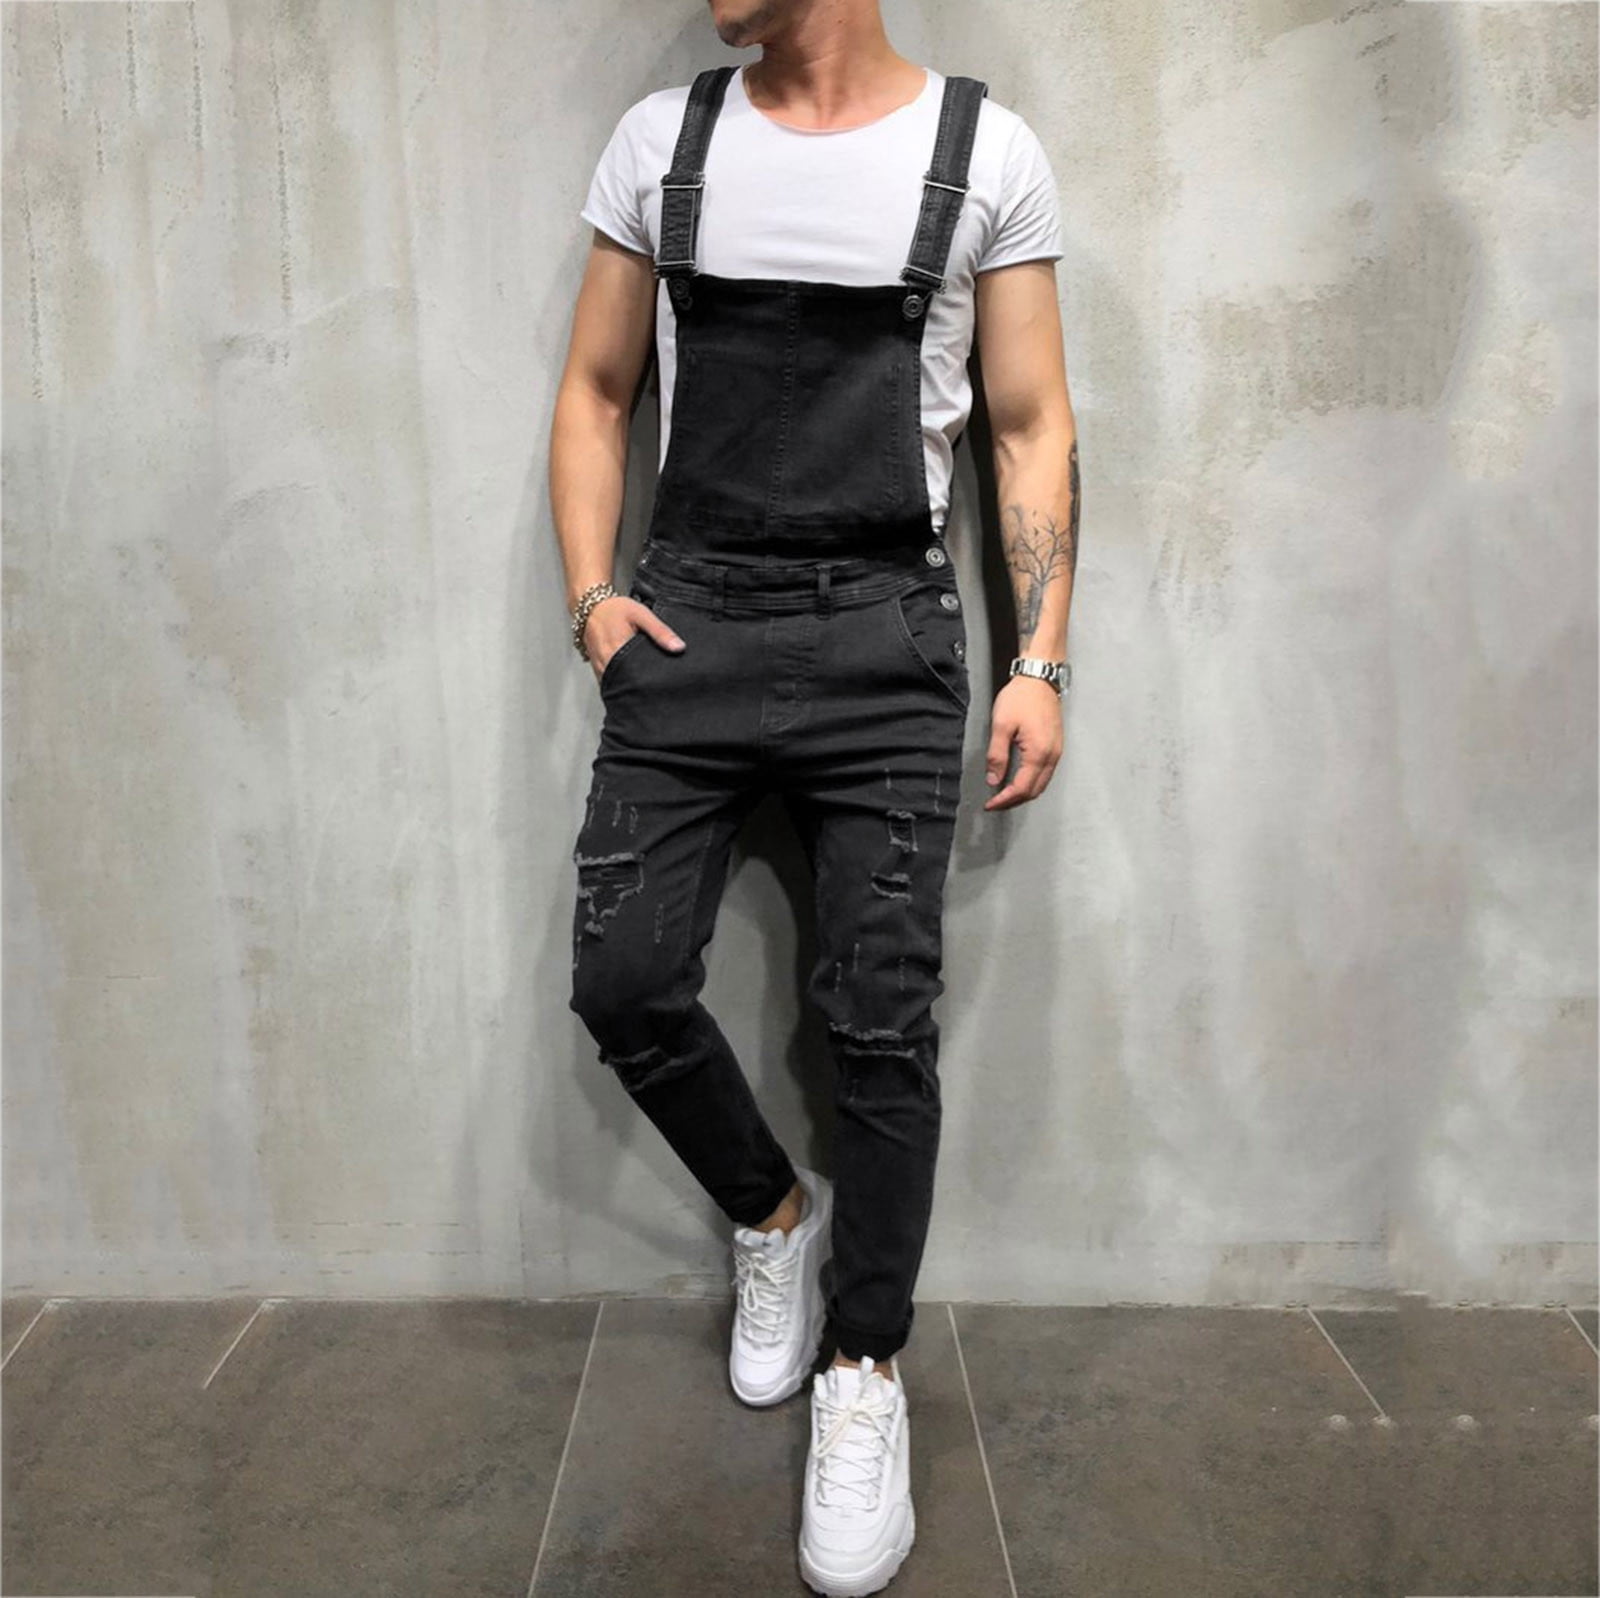 Aoochasliy Mens Jeans Clearance Reduced Price Men's Full Fashion Solid  Denim Trouser Distressed Jeans Long Pants Streetwear